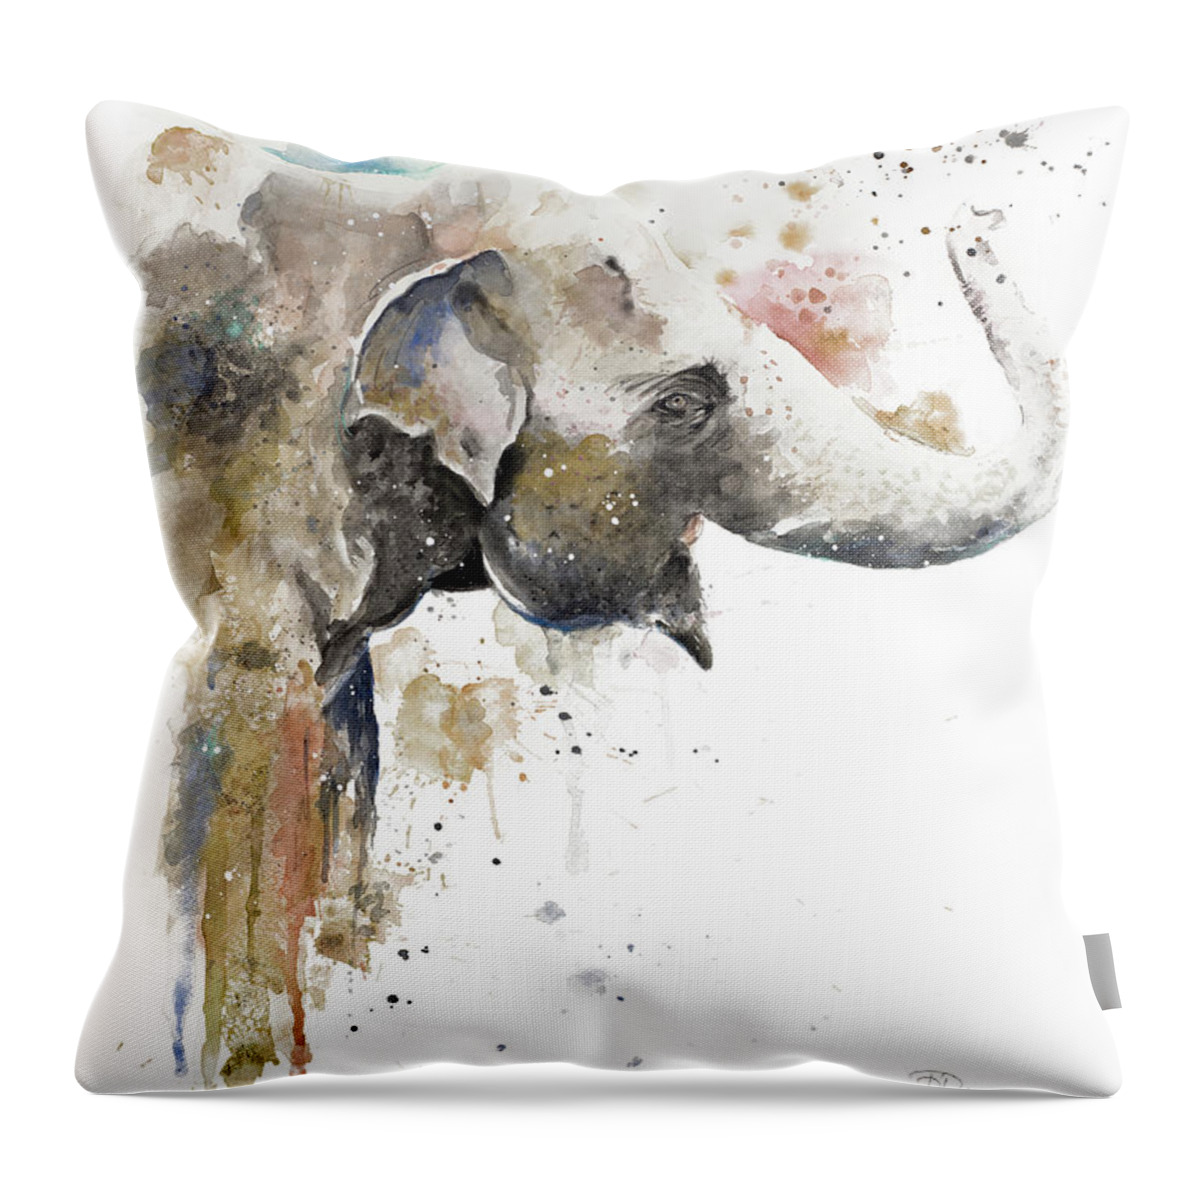 Water Throw Pillow featuring the painting Water Elephant by Patricia Pinto